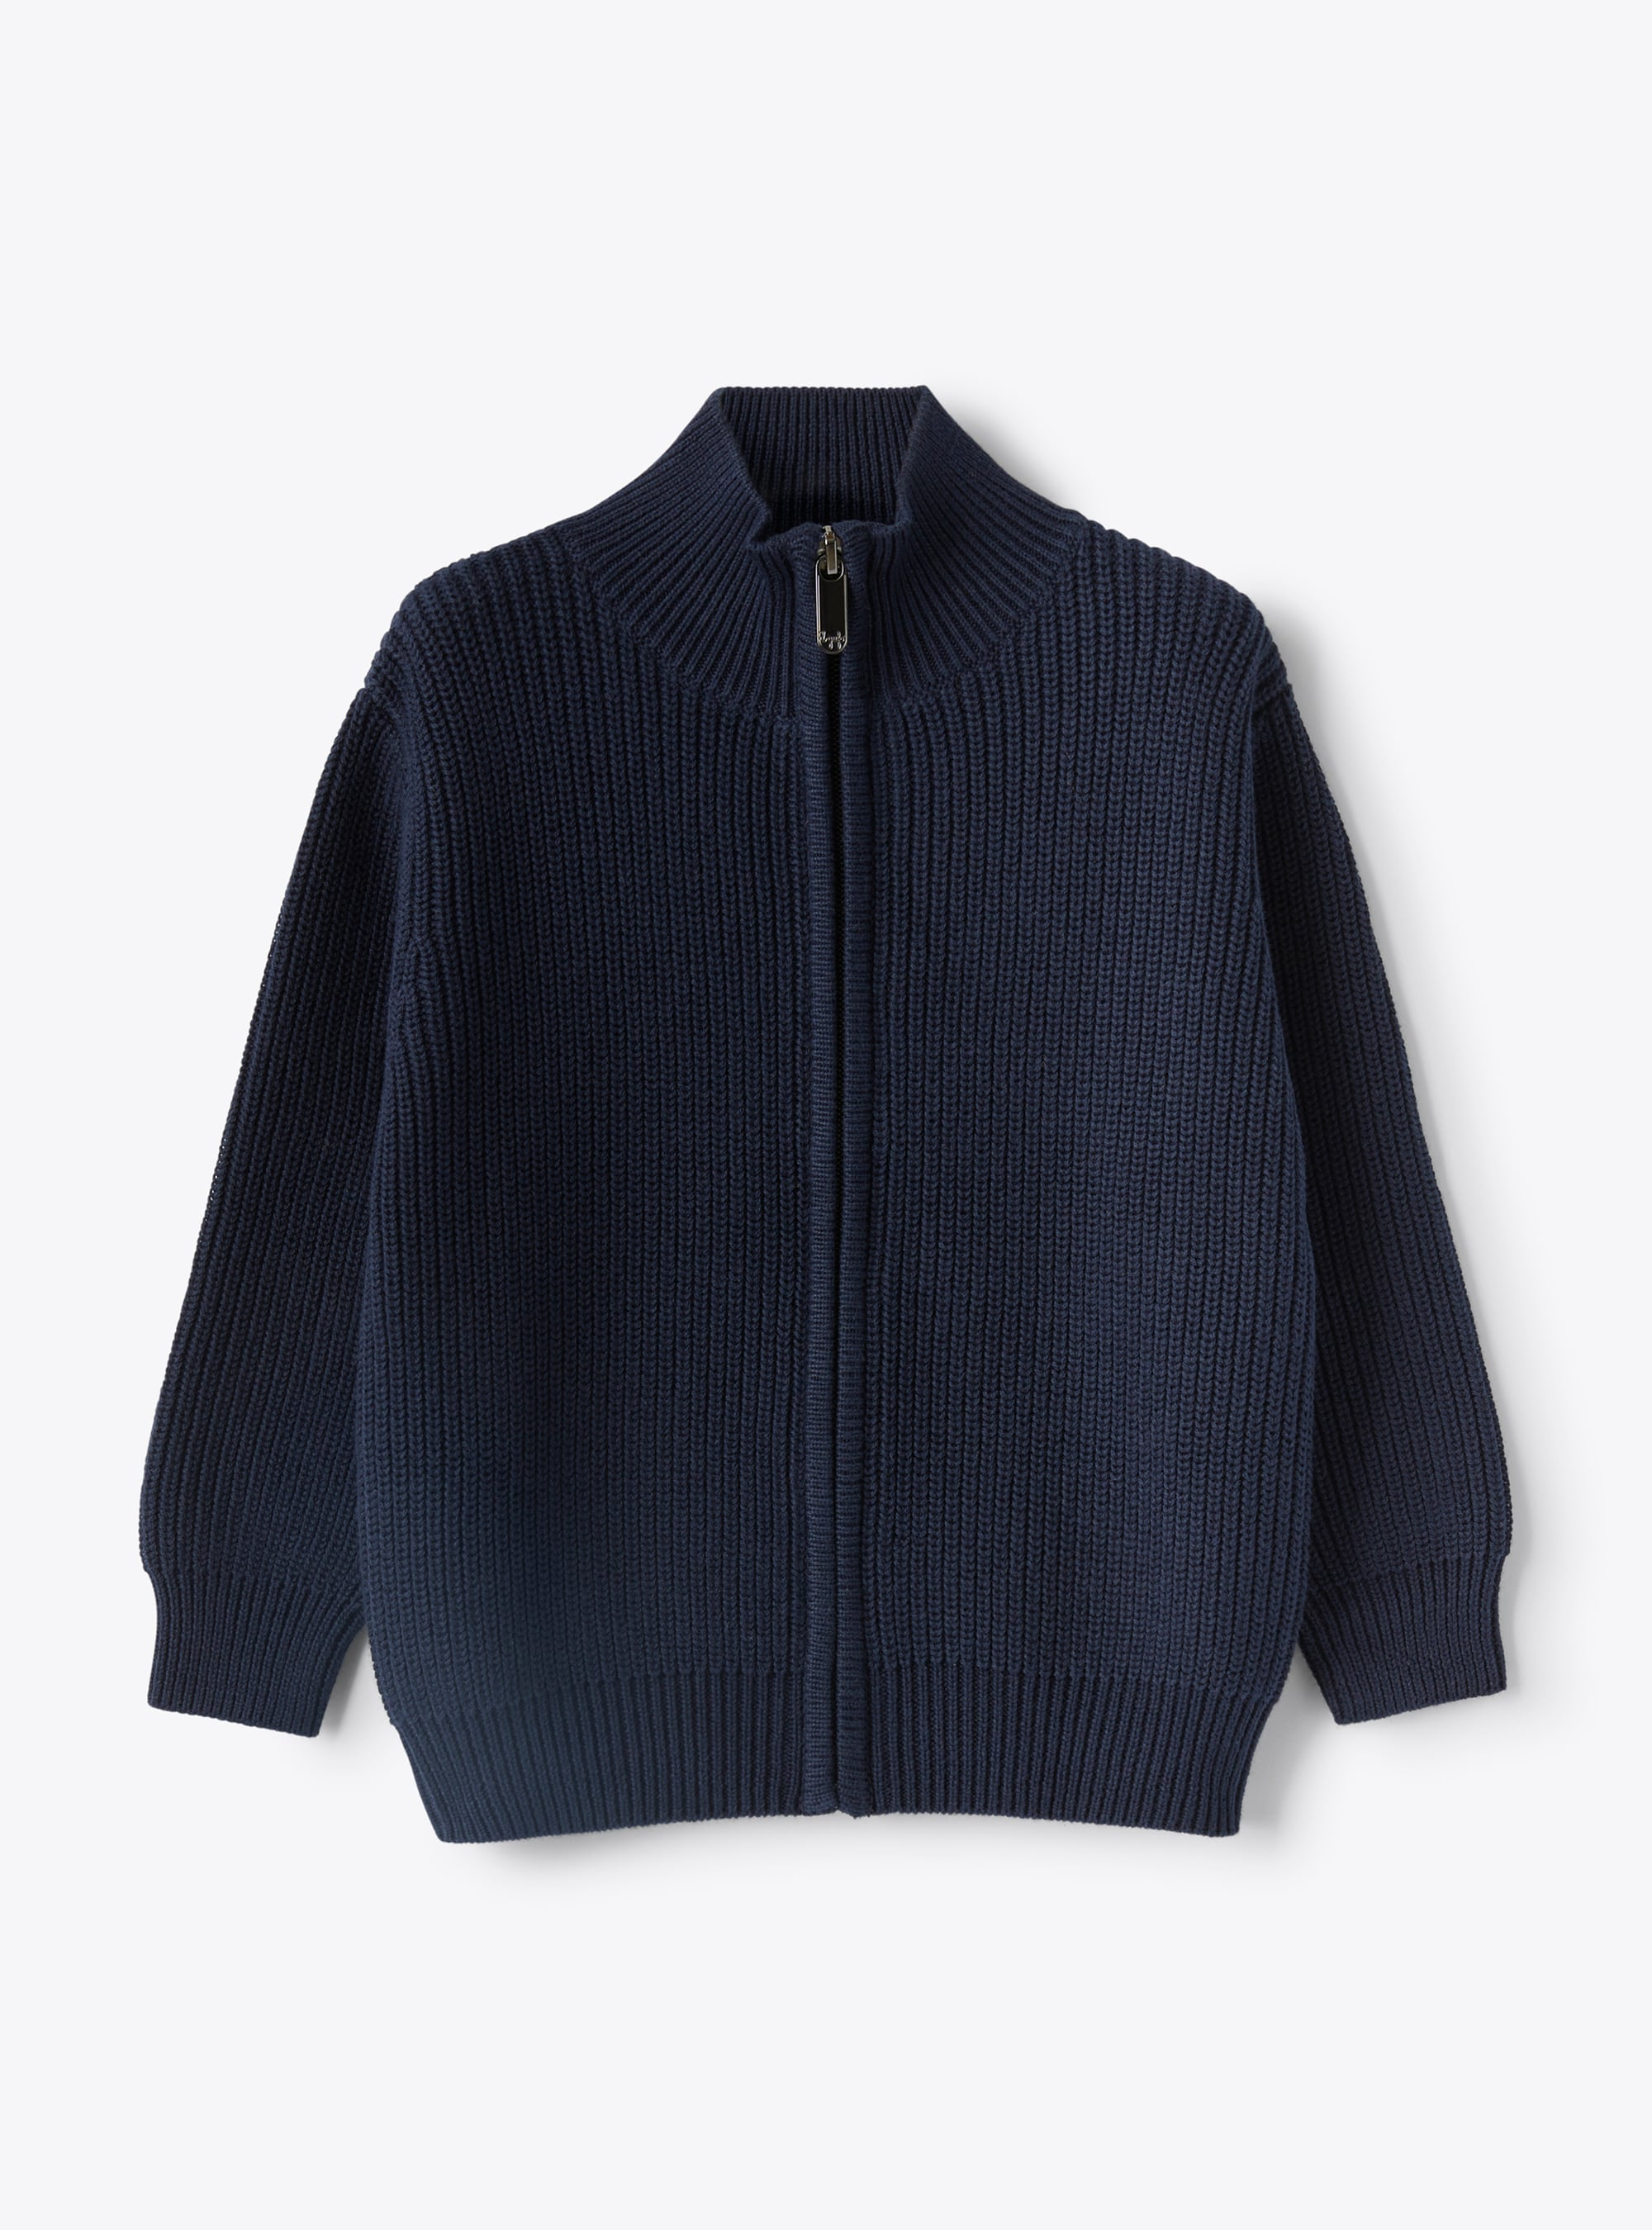 Zip-up cardigan in organic navy-blue cotton - Sweaters - Il Gufo